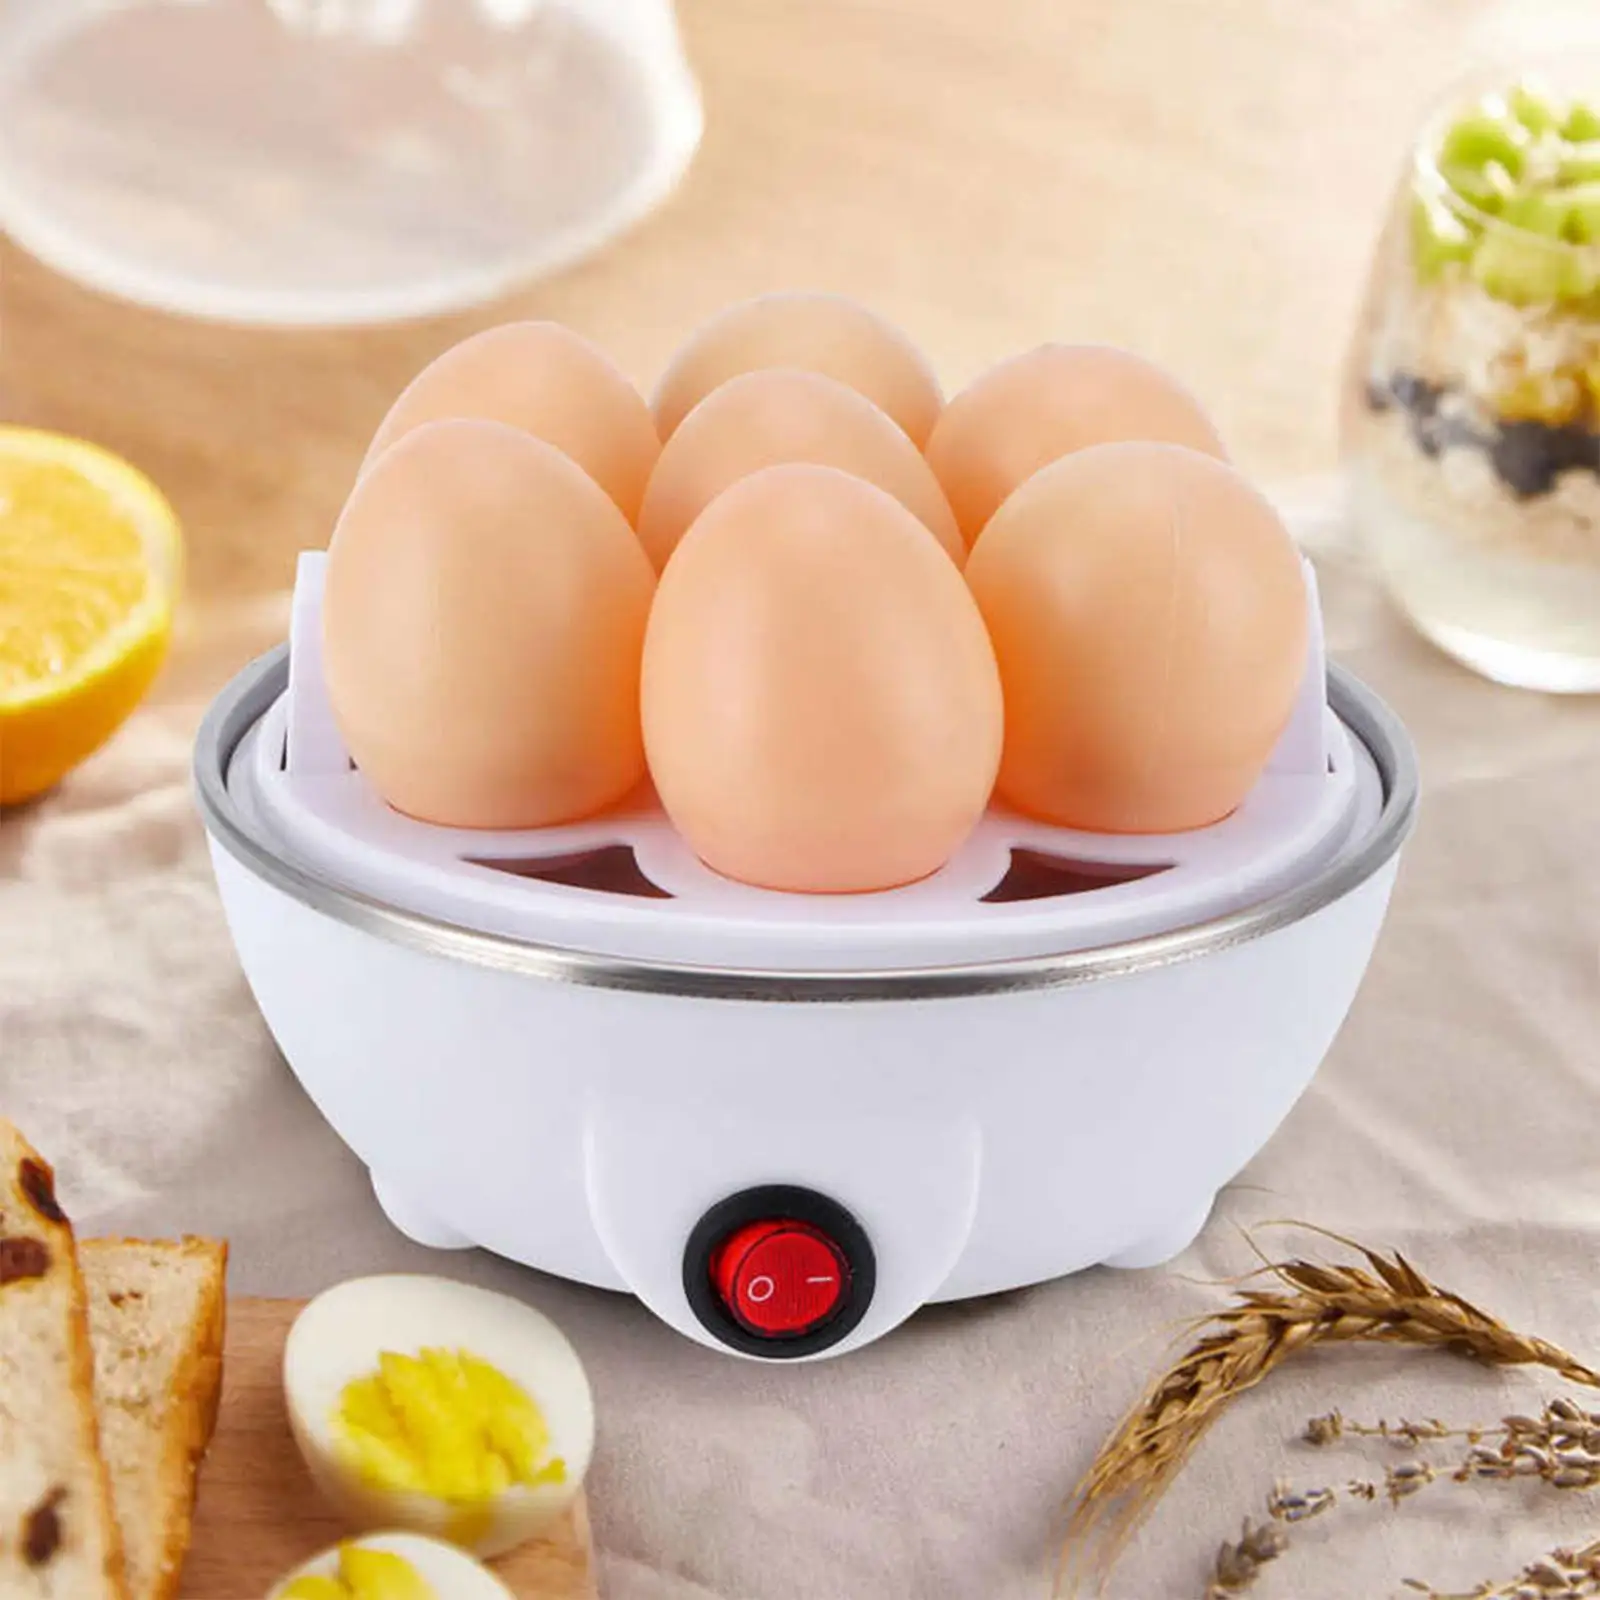 Egg Poachers plug us Temperature Steamer Stainless Portable Steaming or Boiling Egg Steamer for Cooking Vegetables Pot